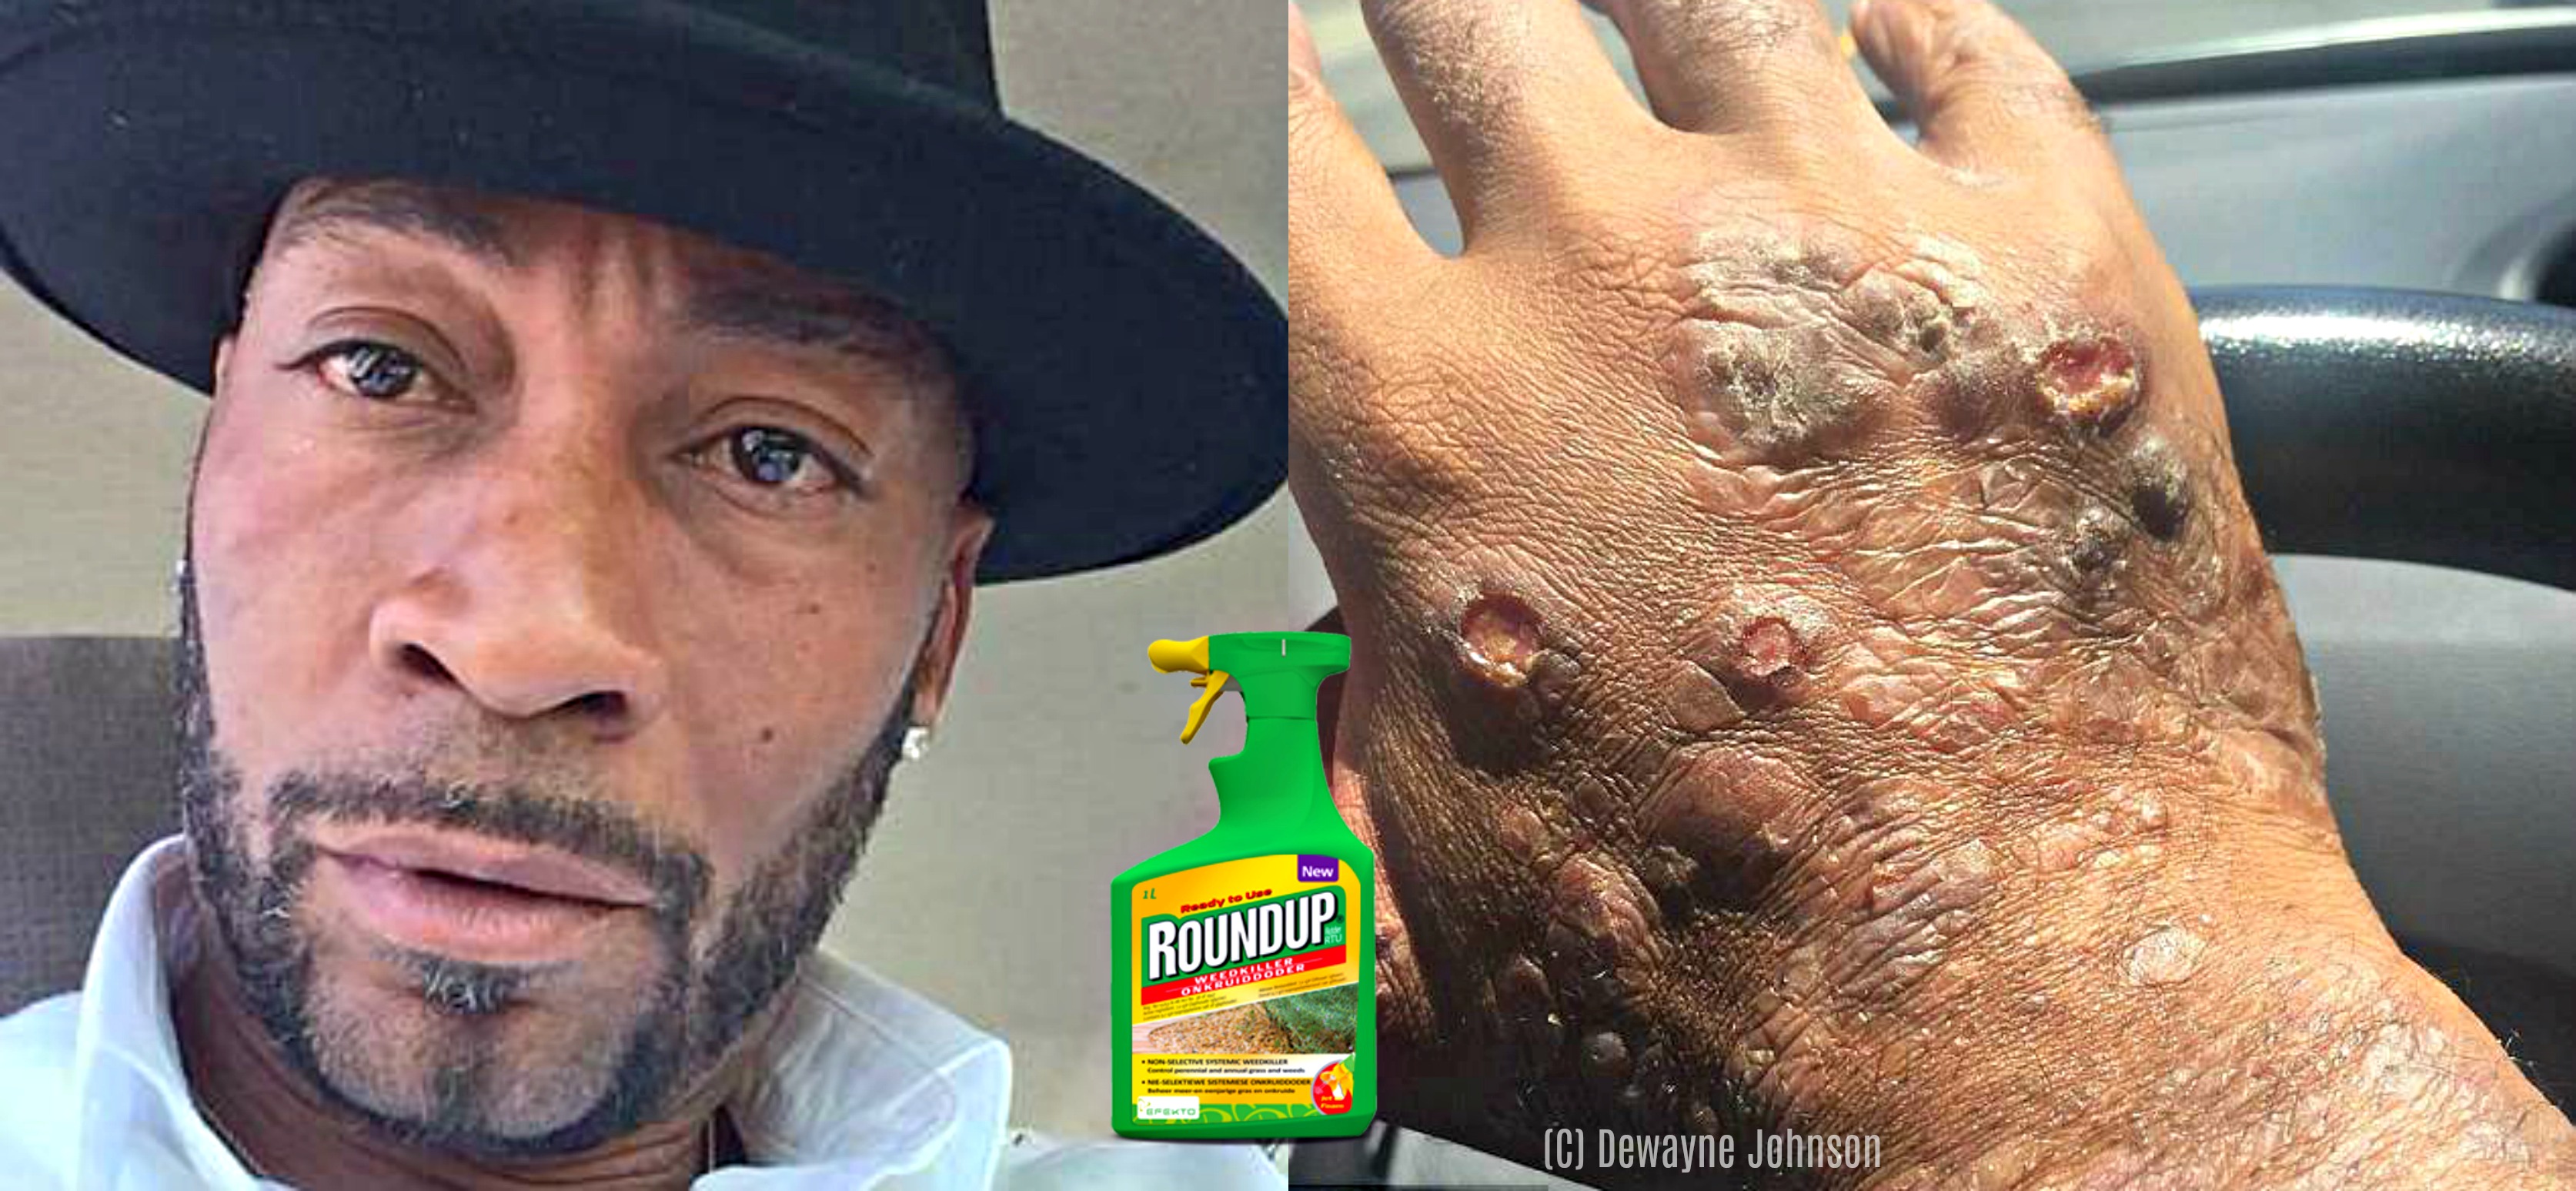 Dying Man Testifies Against Monsanto This Week, First Trial on Roundup's Link to Cancer